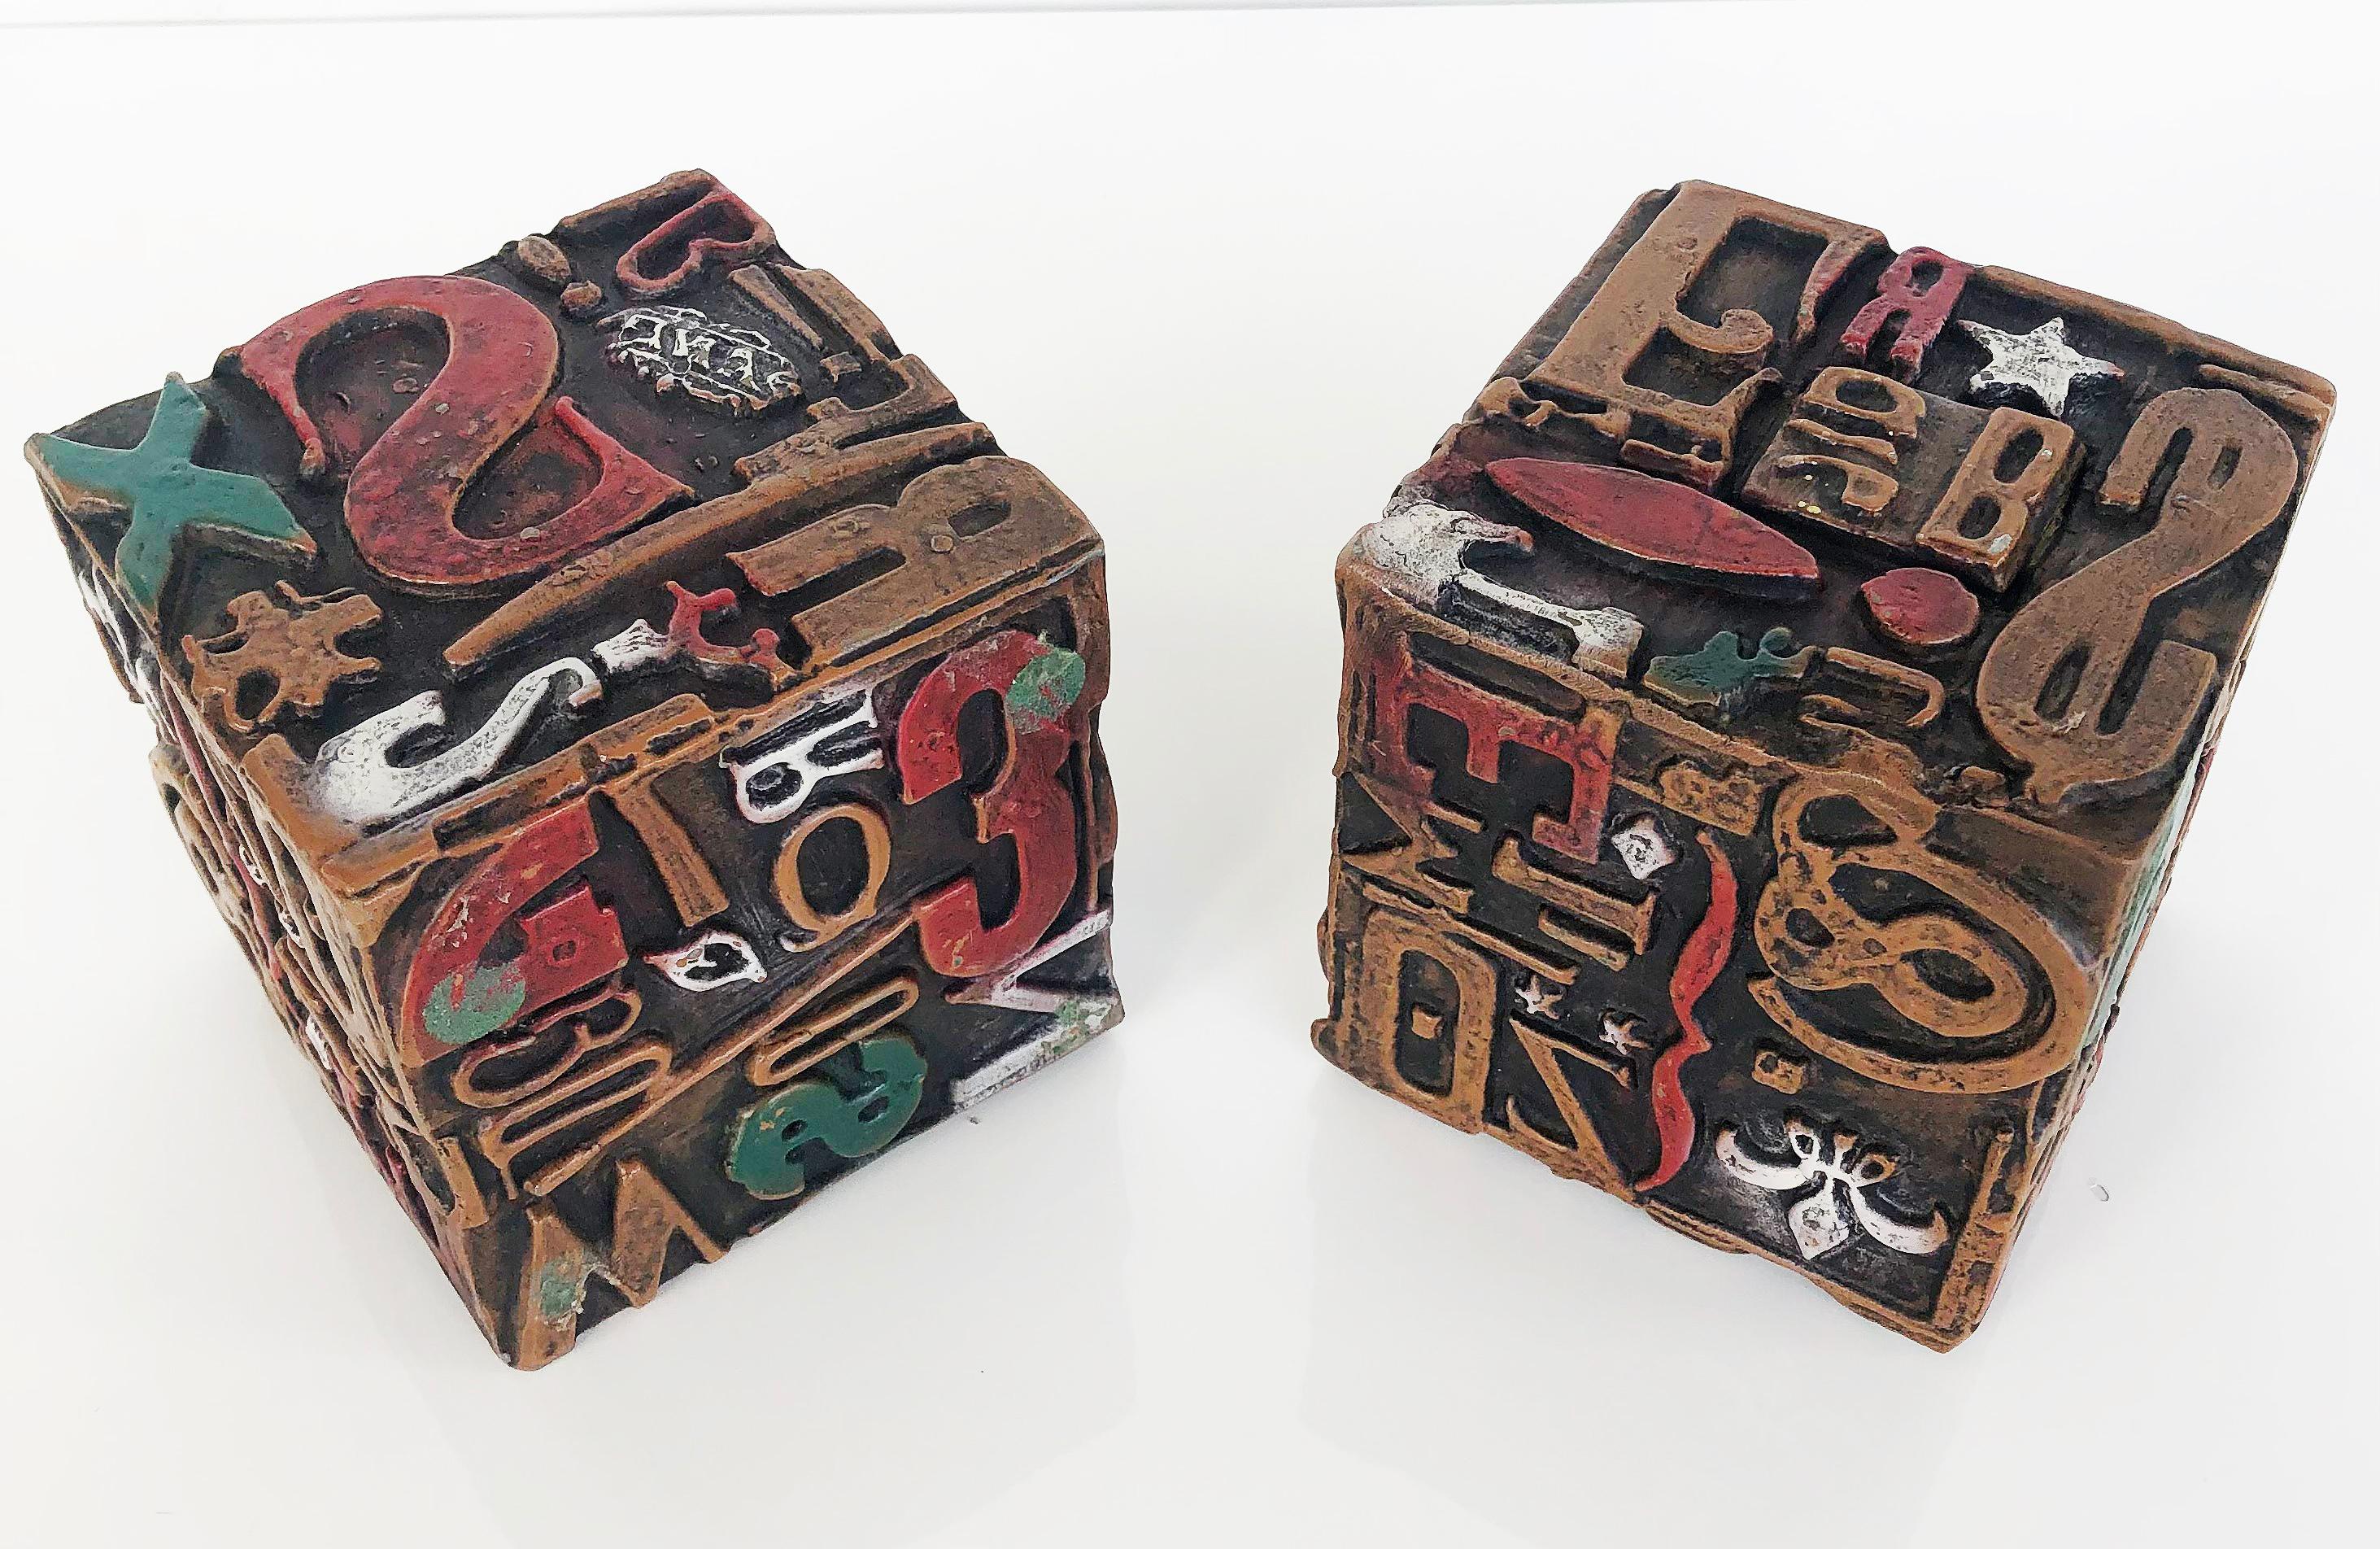 Mid-century Sheldon Rose AlphaSculpt Typesetter Blocks, Vanguard Studios 1960s

Offered for sale is a pair of mid-century modern sculptures manufactured by Vanguard Studios and designed by Sheldon Rose. These decorative blocks contain type